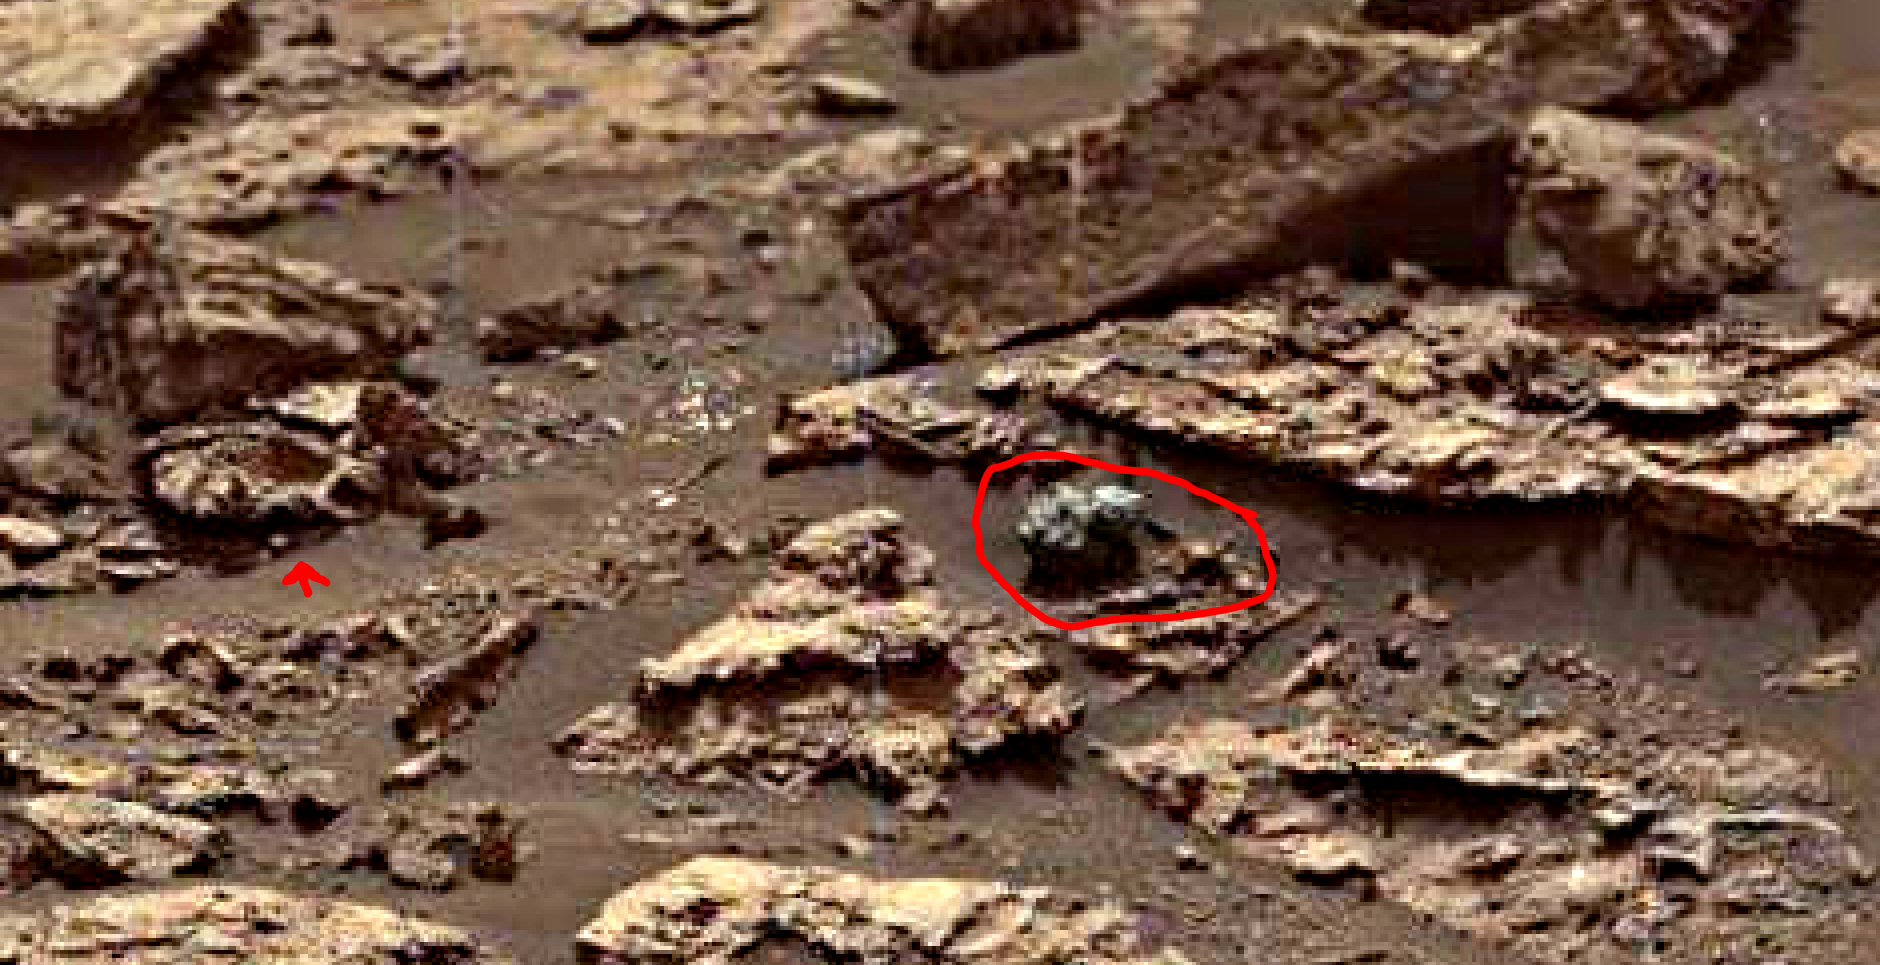 mars-sol-1485-anomaly-artifacts-11-was-life-on-mars